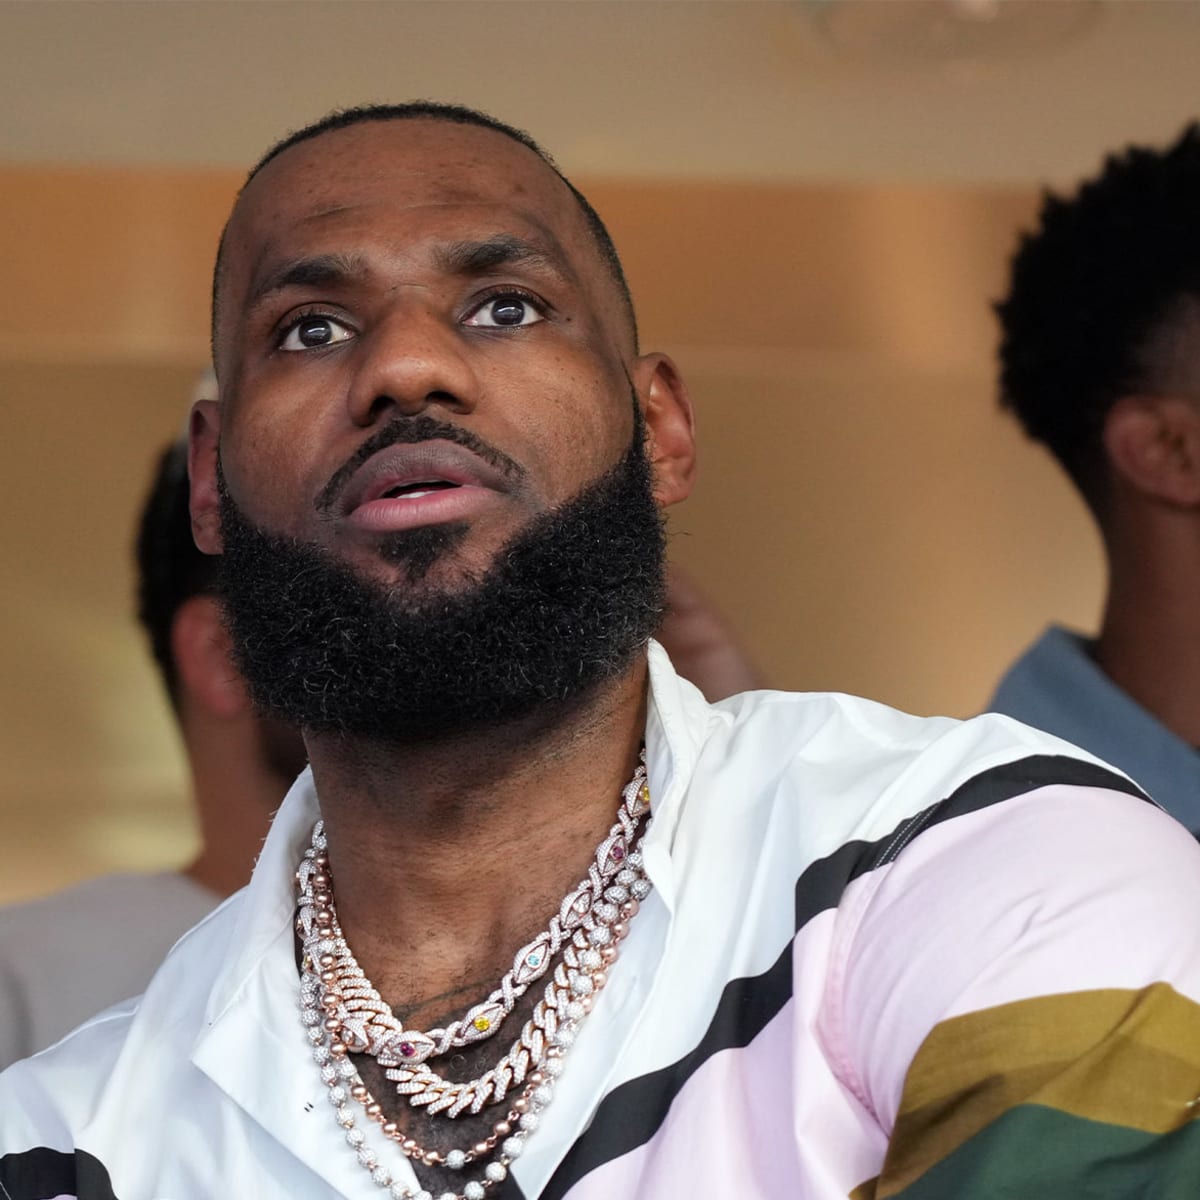 Inside LeBron James' insane watch collection